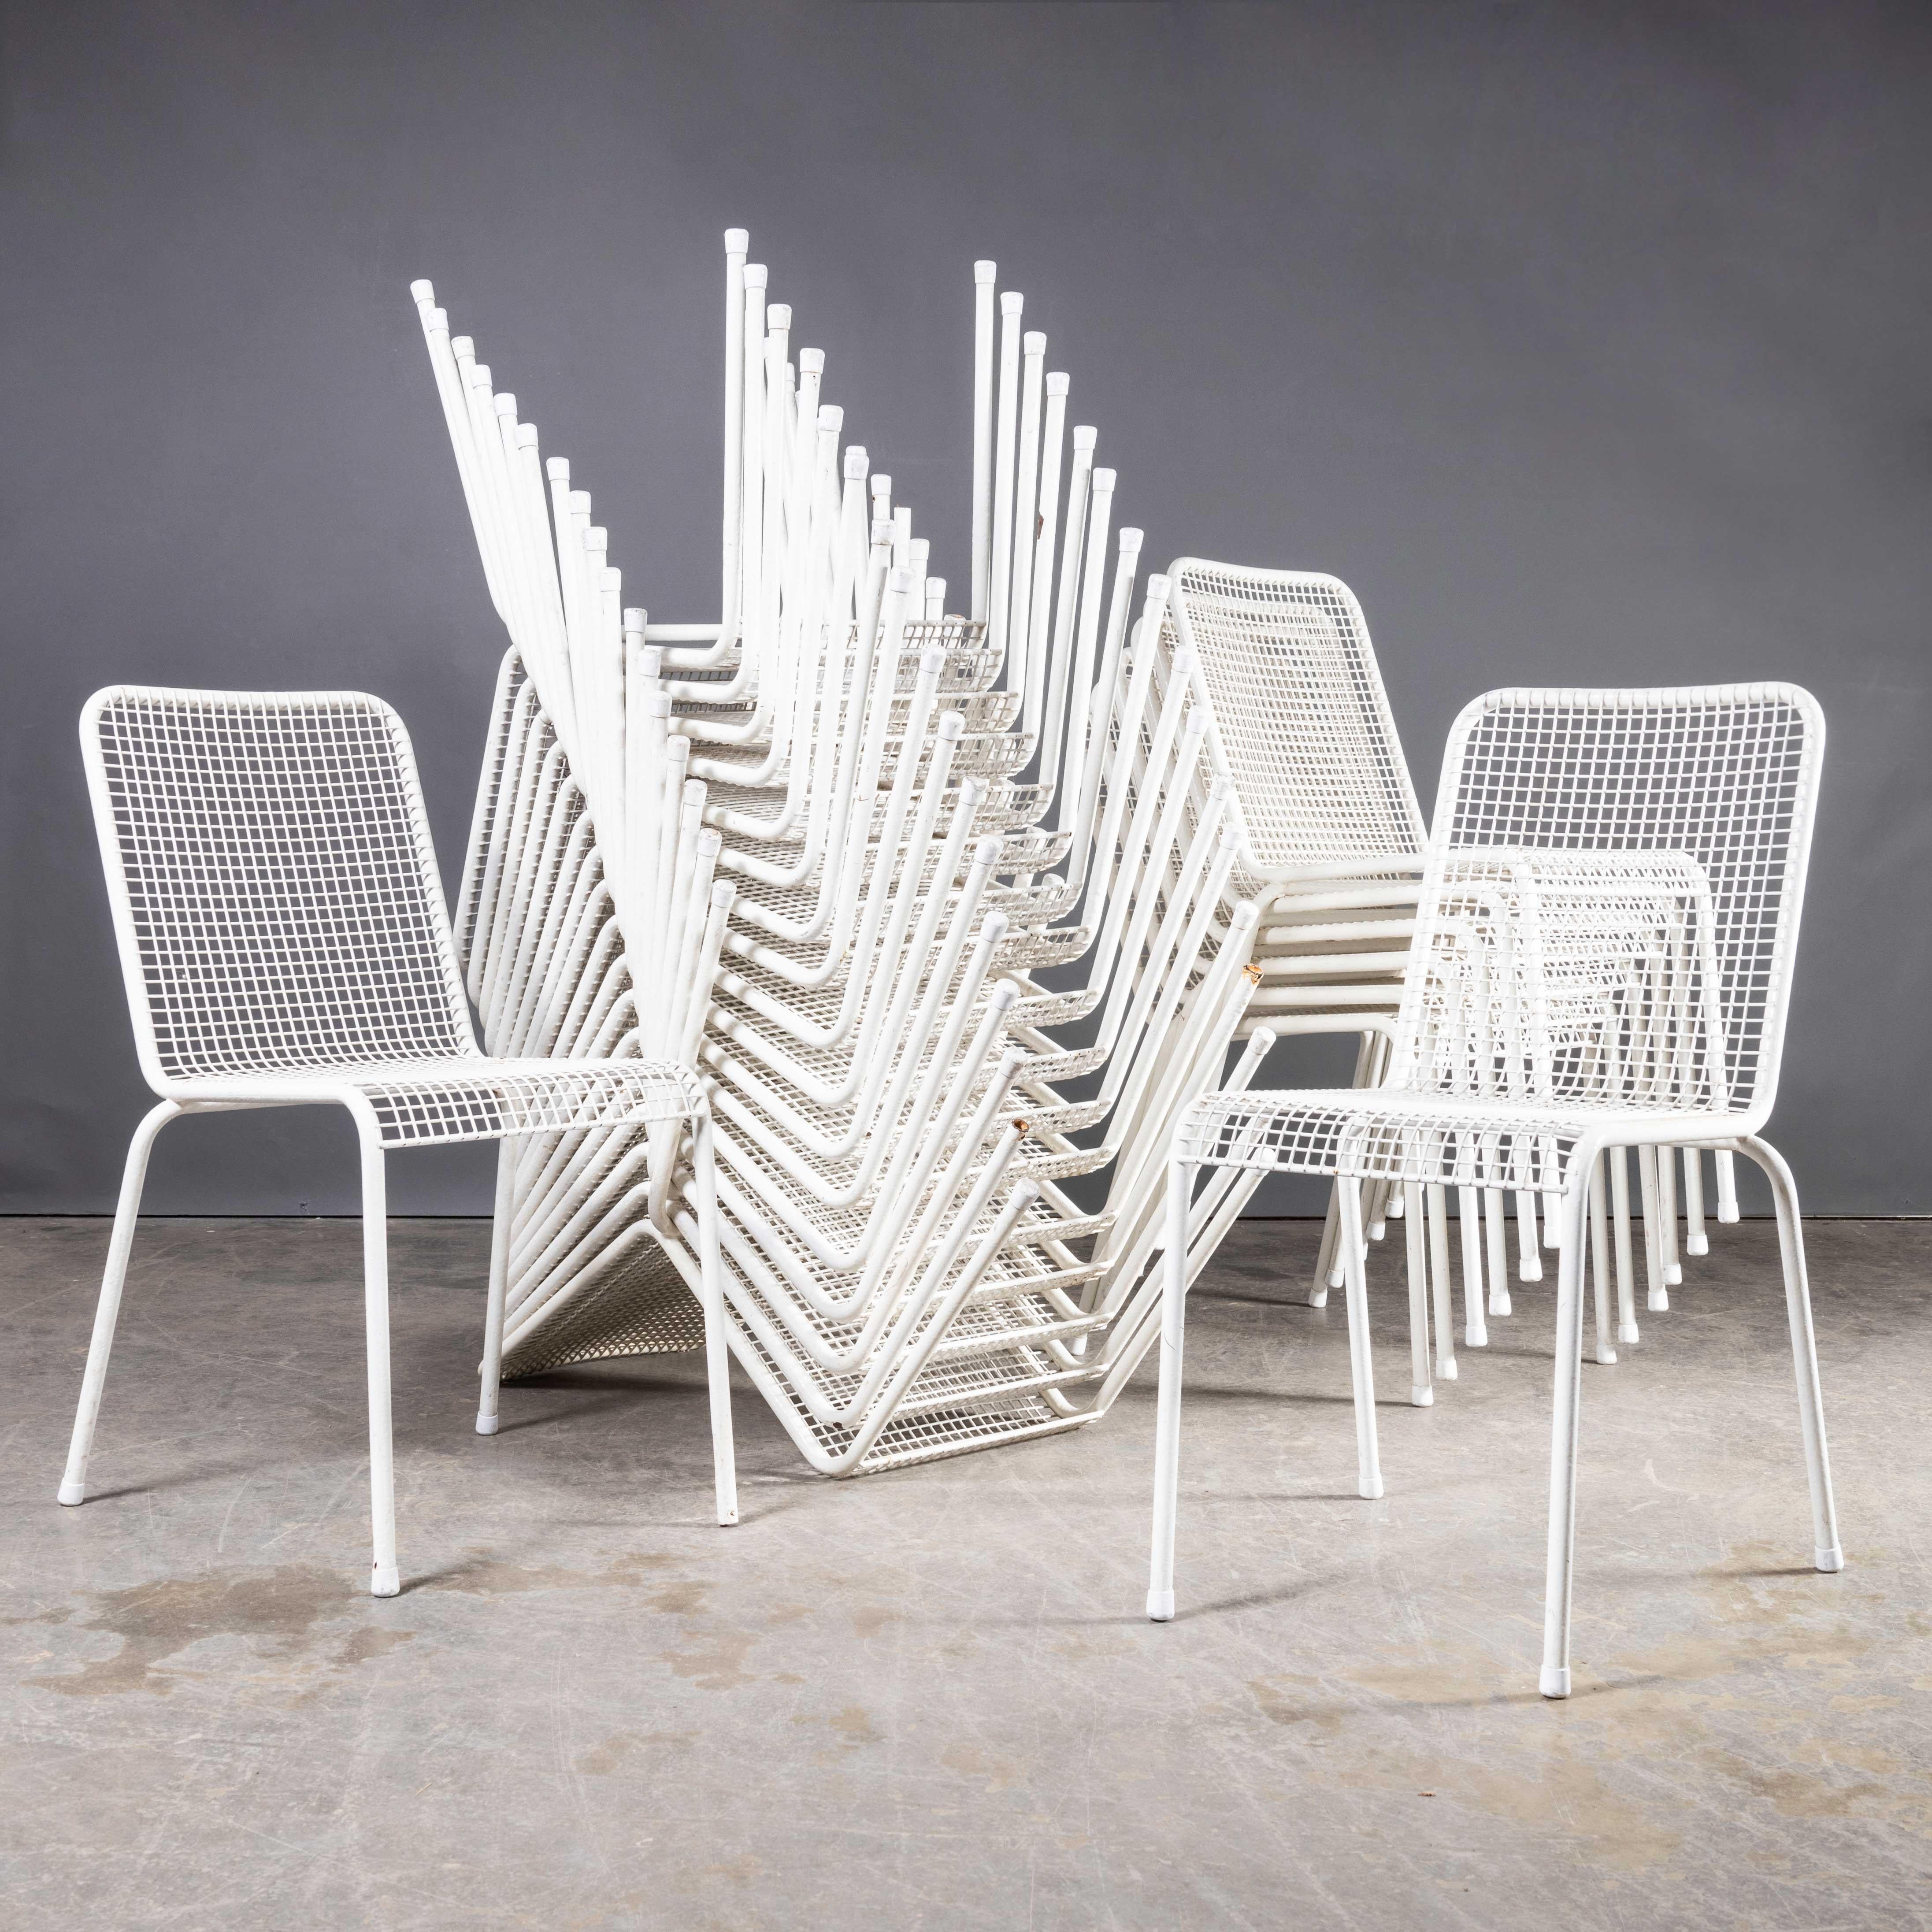 1970’s French Original Wire Mesh White Outdoor Dining Chairs – Various Quantities Available
1970’s French Original Wire Mesh White Outdoor Dining Chairs – Various Quantities Available. Simple stylish chairs from France. The frames are steel which